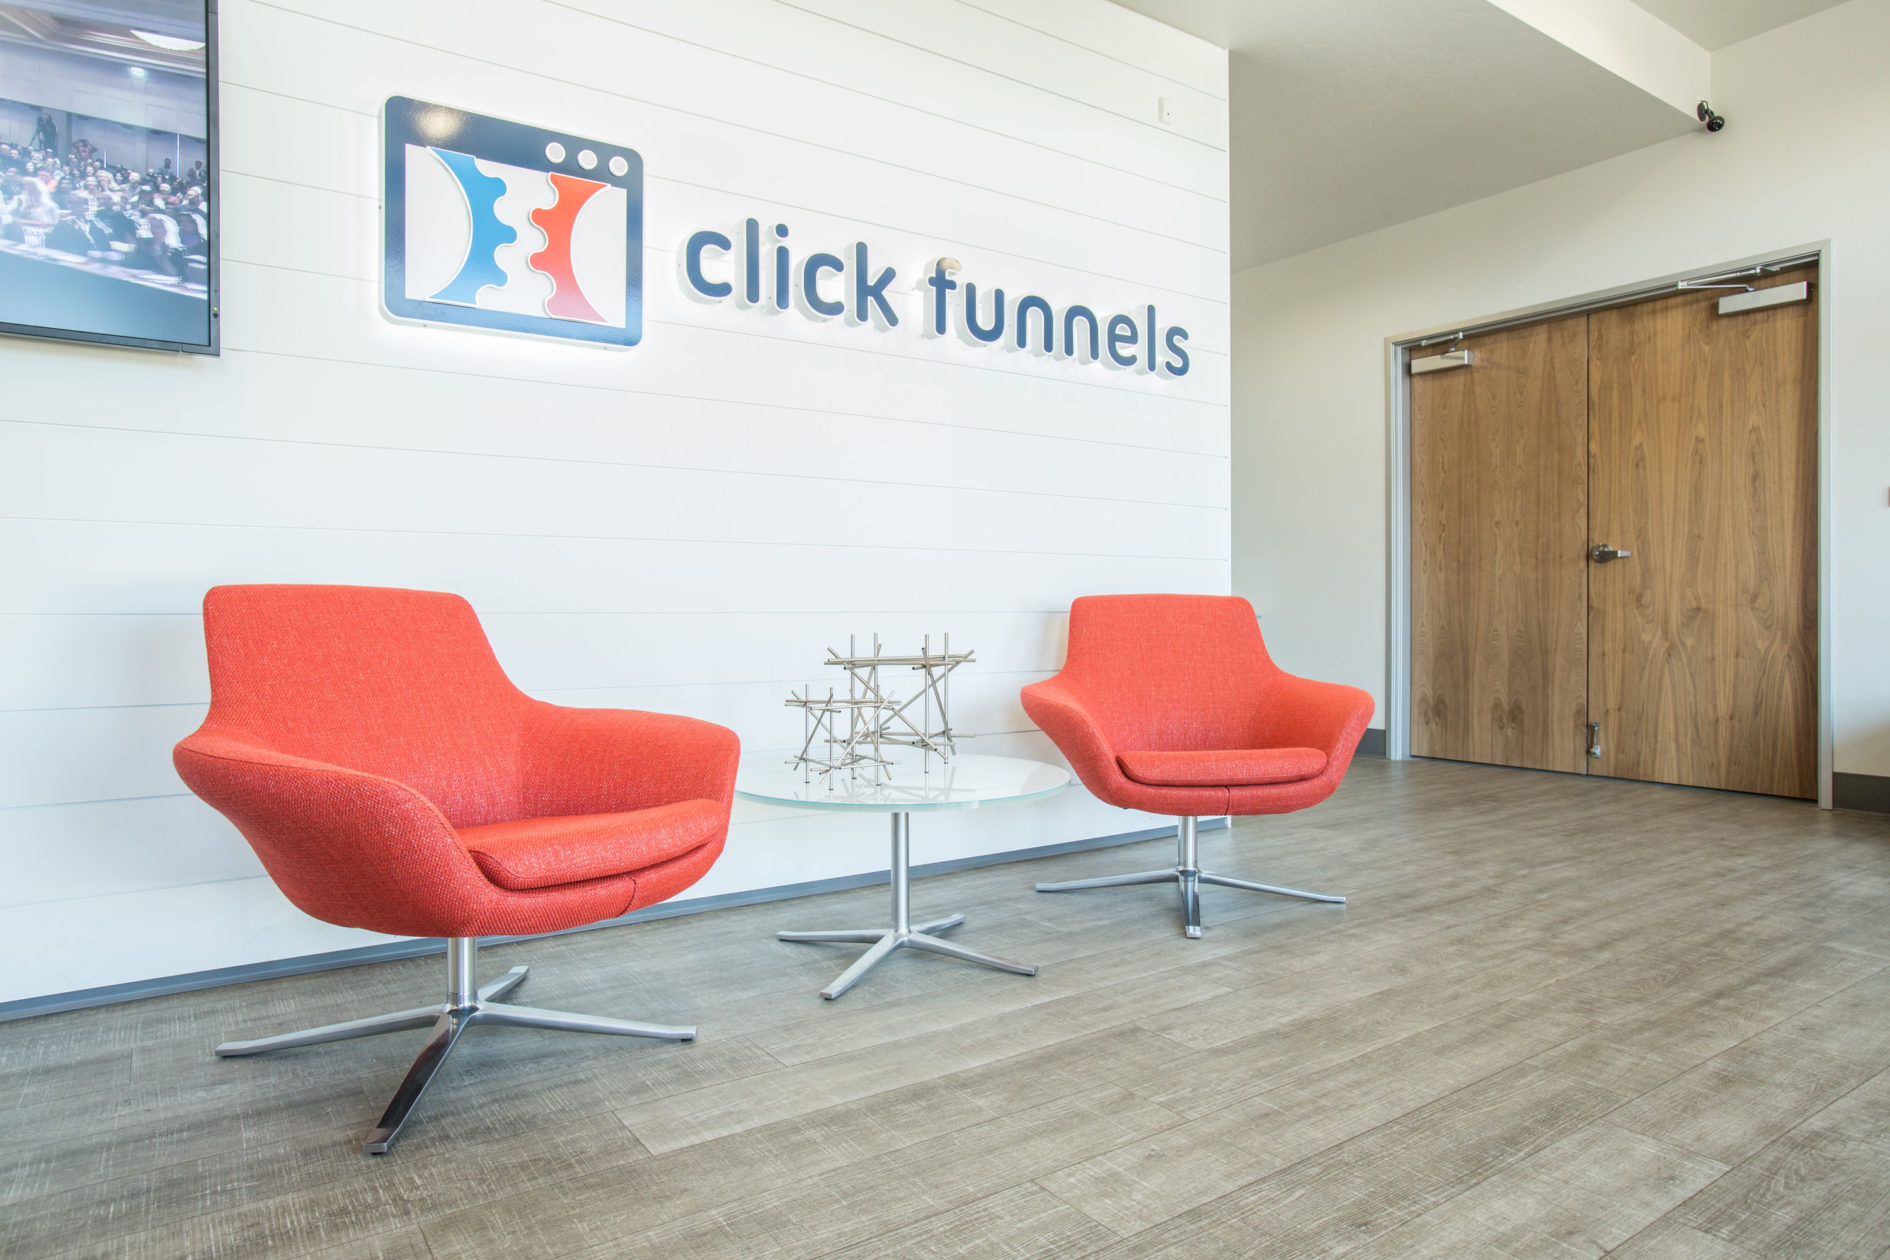 Click Funnels entry space